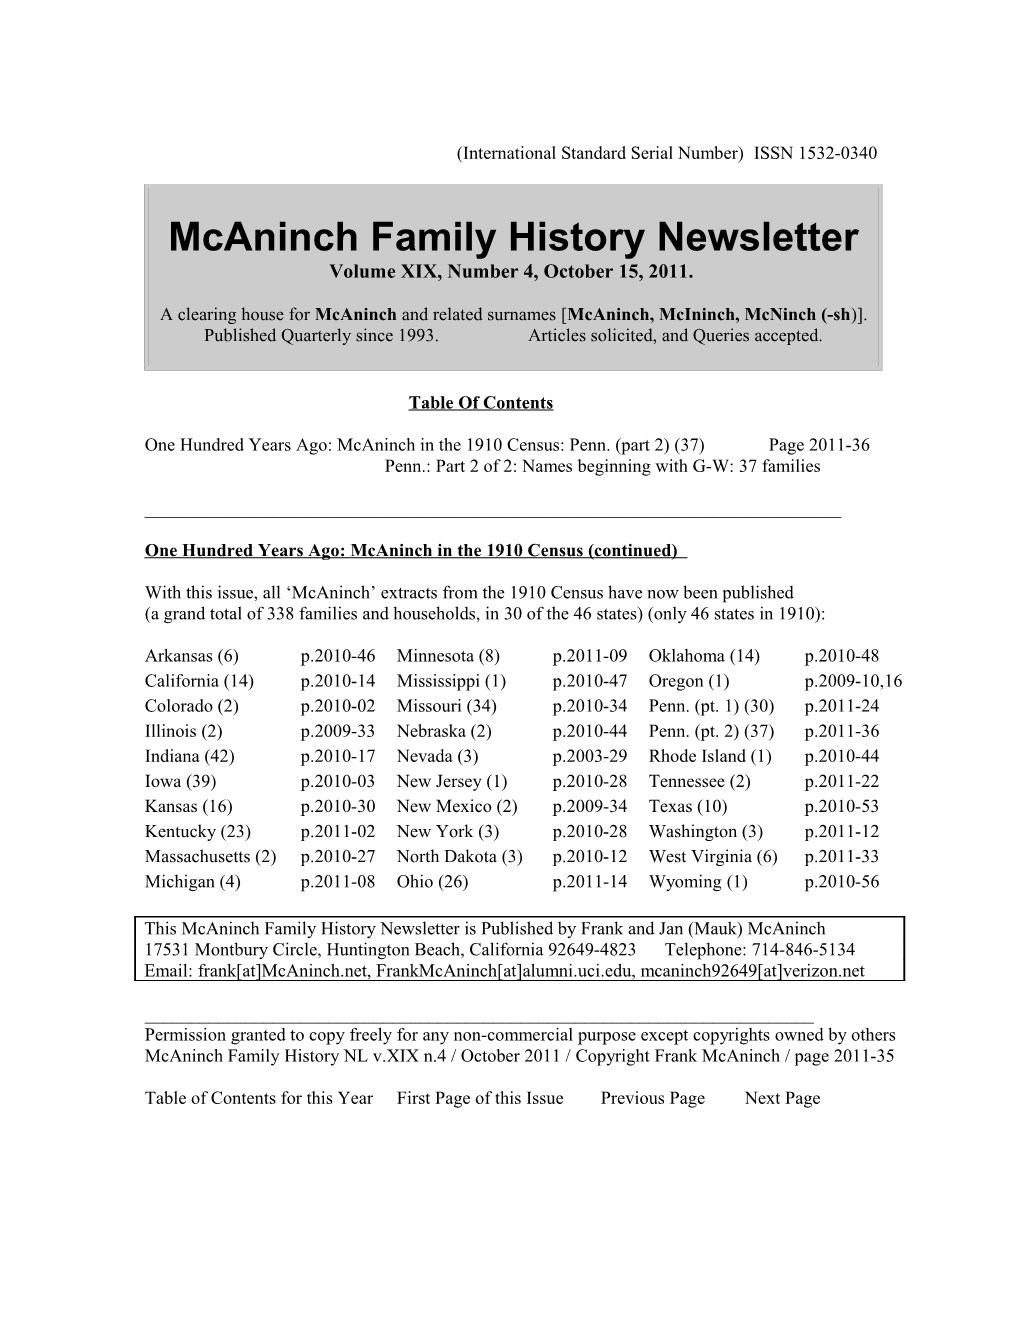 Mcaninch Family History Newsletter